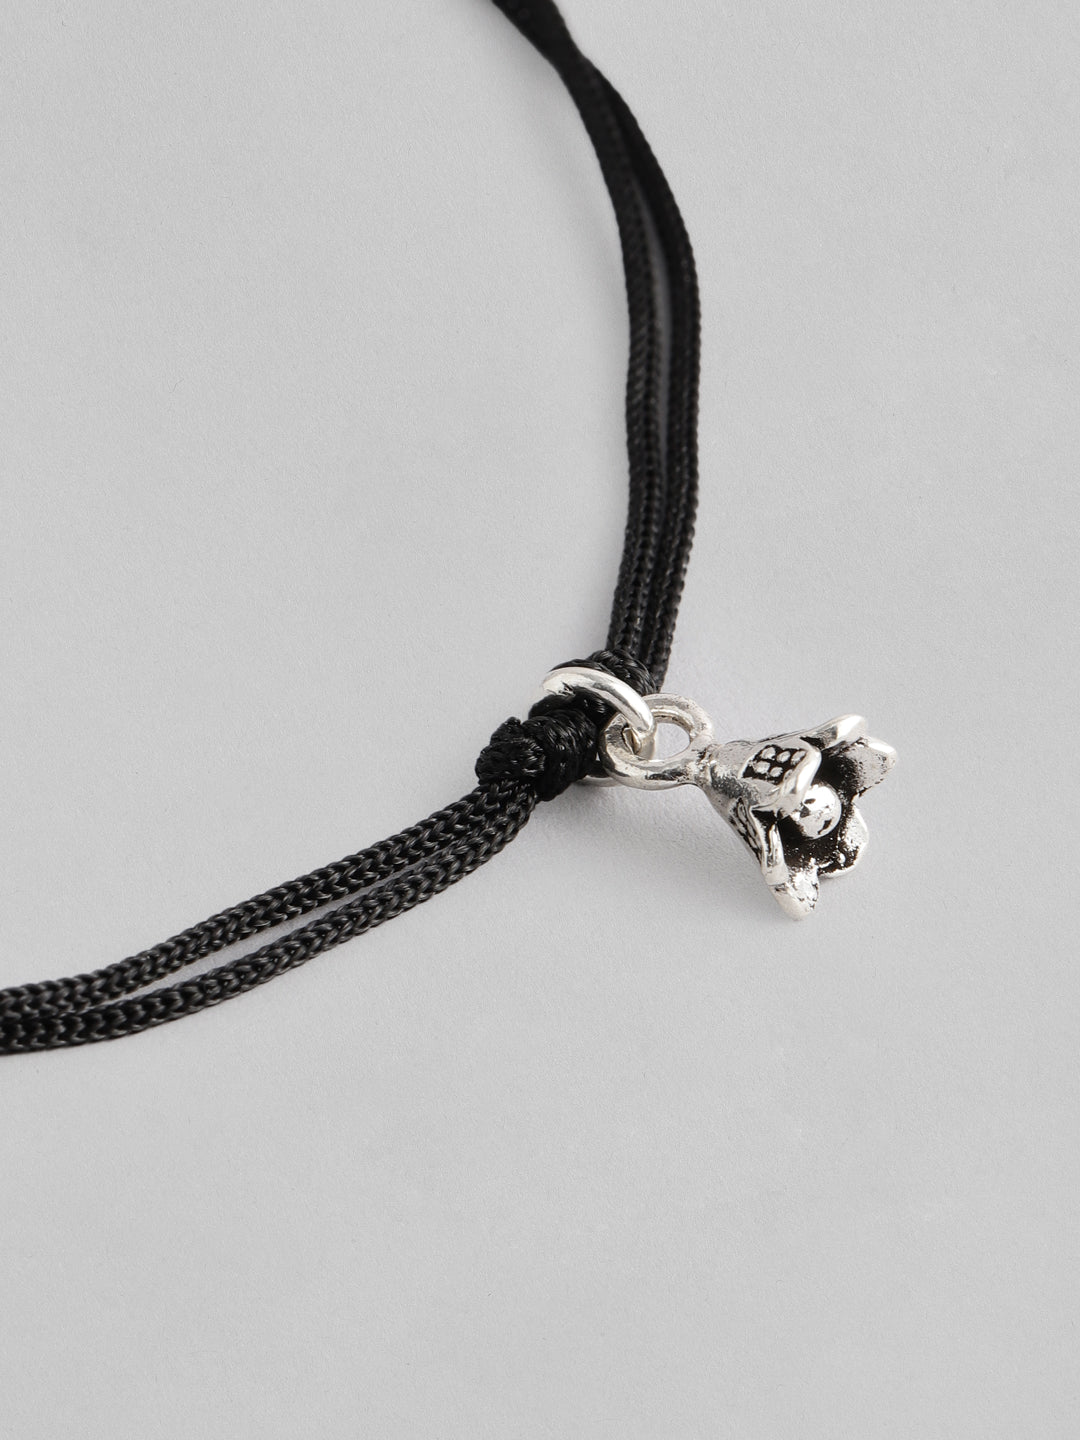 Black Thread Tribal Inspired Anklet With 925 Sterling Silver Flower Charms